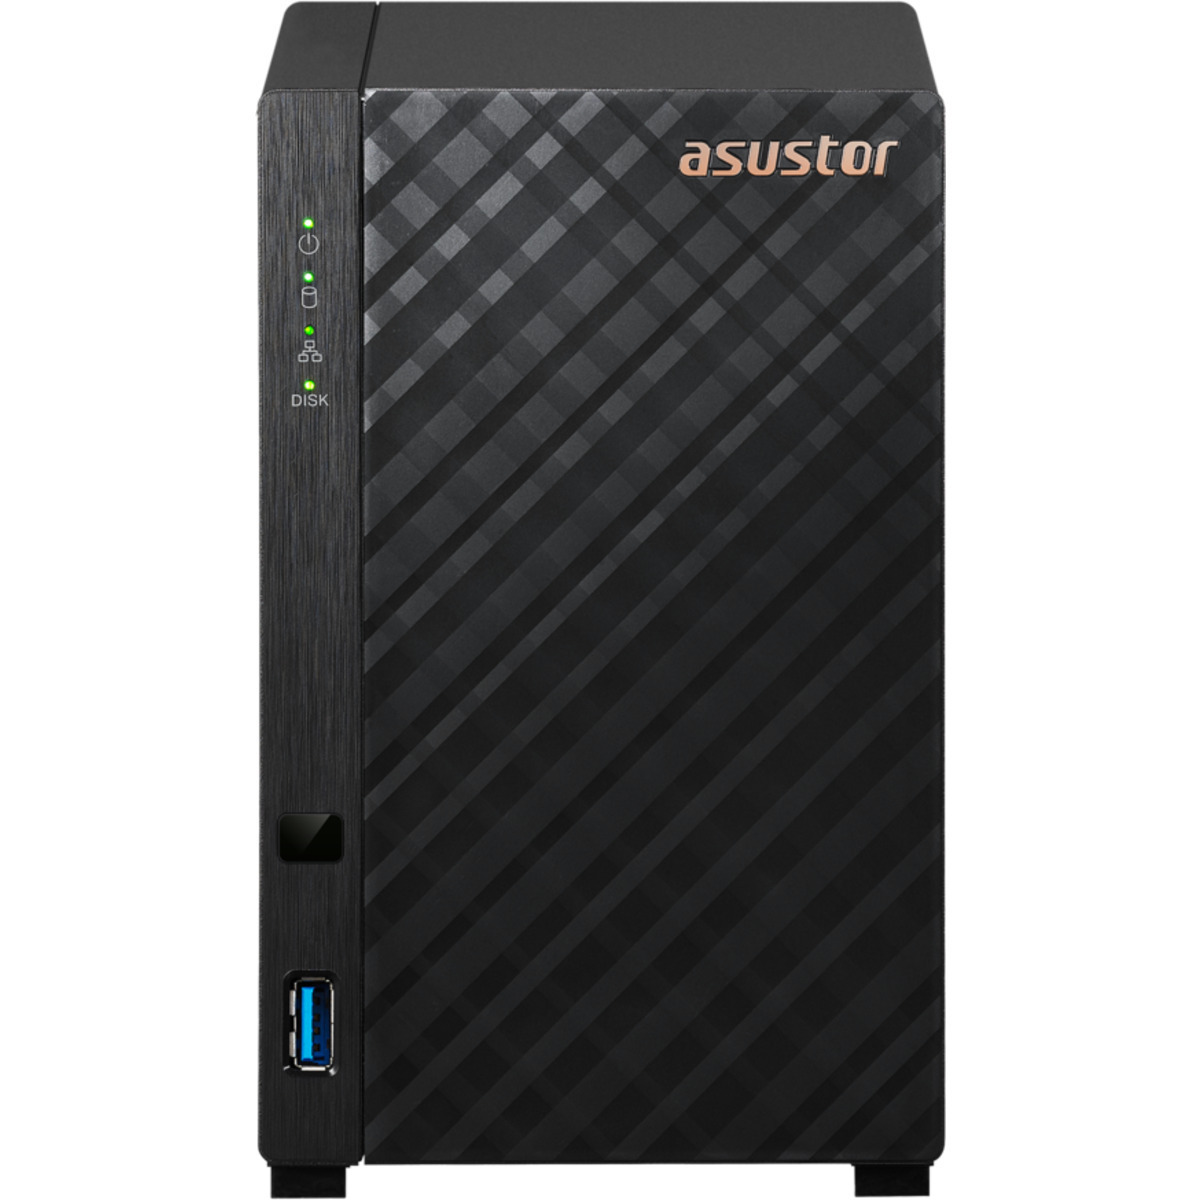 ASUSTOR DRIVESTOR 2 Lite AS1102TL 24tb 2-Bay Desktop Personal / Basic Home / Small Office NAS - Network Attached Storage Device 2x12tb Seagate EXOS X18 ST12000NM000J 3.5 7200rpm SATA 6Gb/s HDD ENTERPRISE Class Drives Installed - Burn-In Tested DRIVESTOR 2 Lite AS1102TL